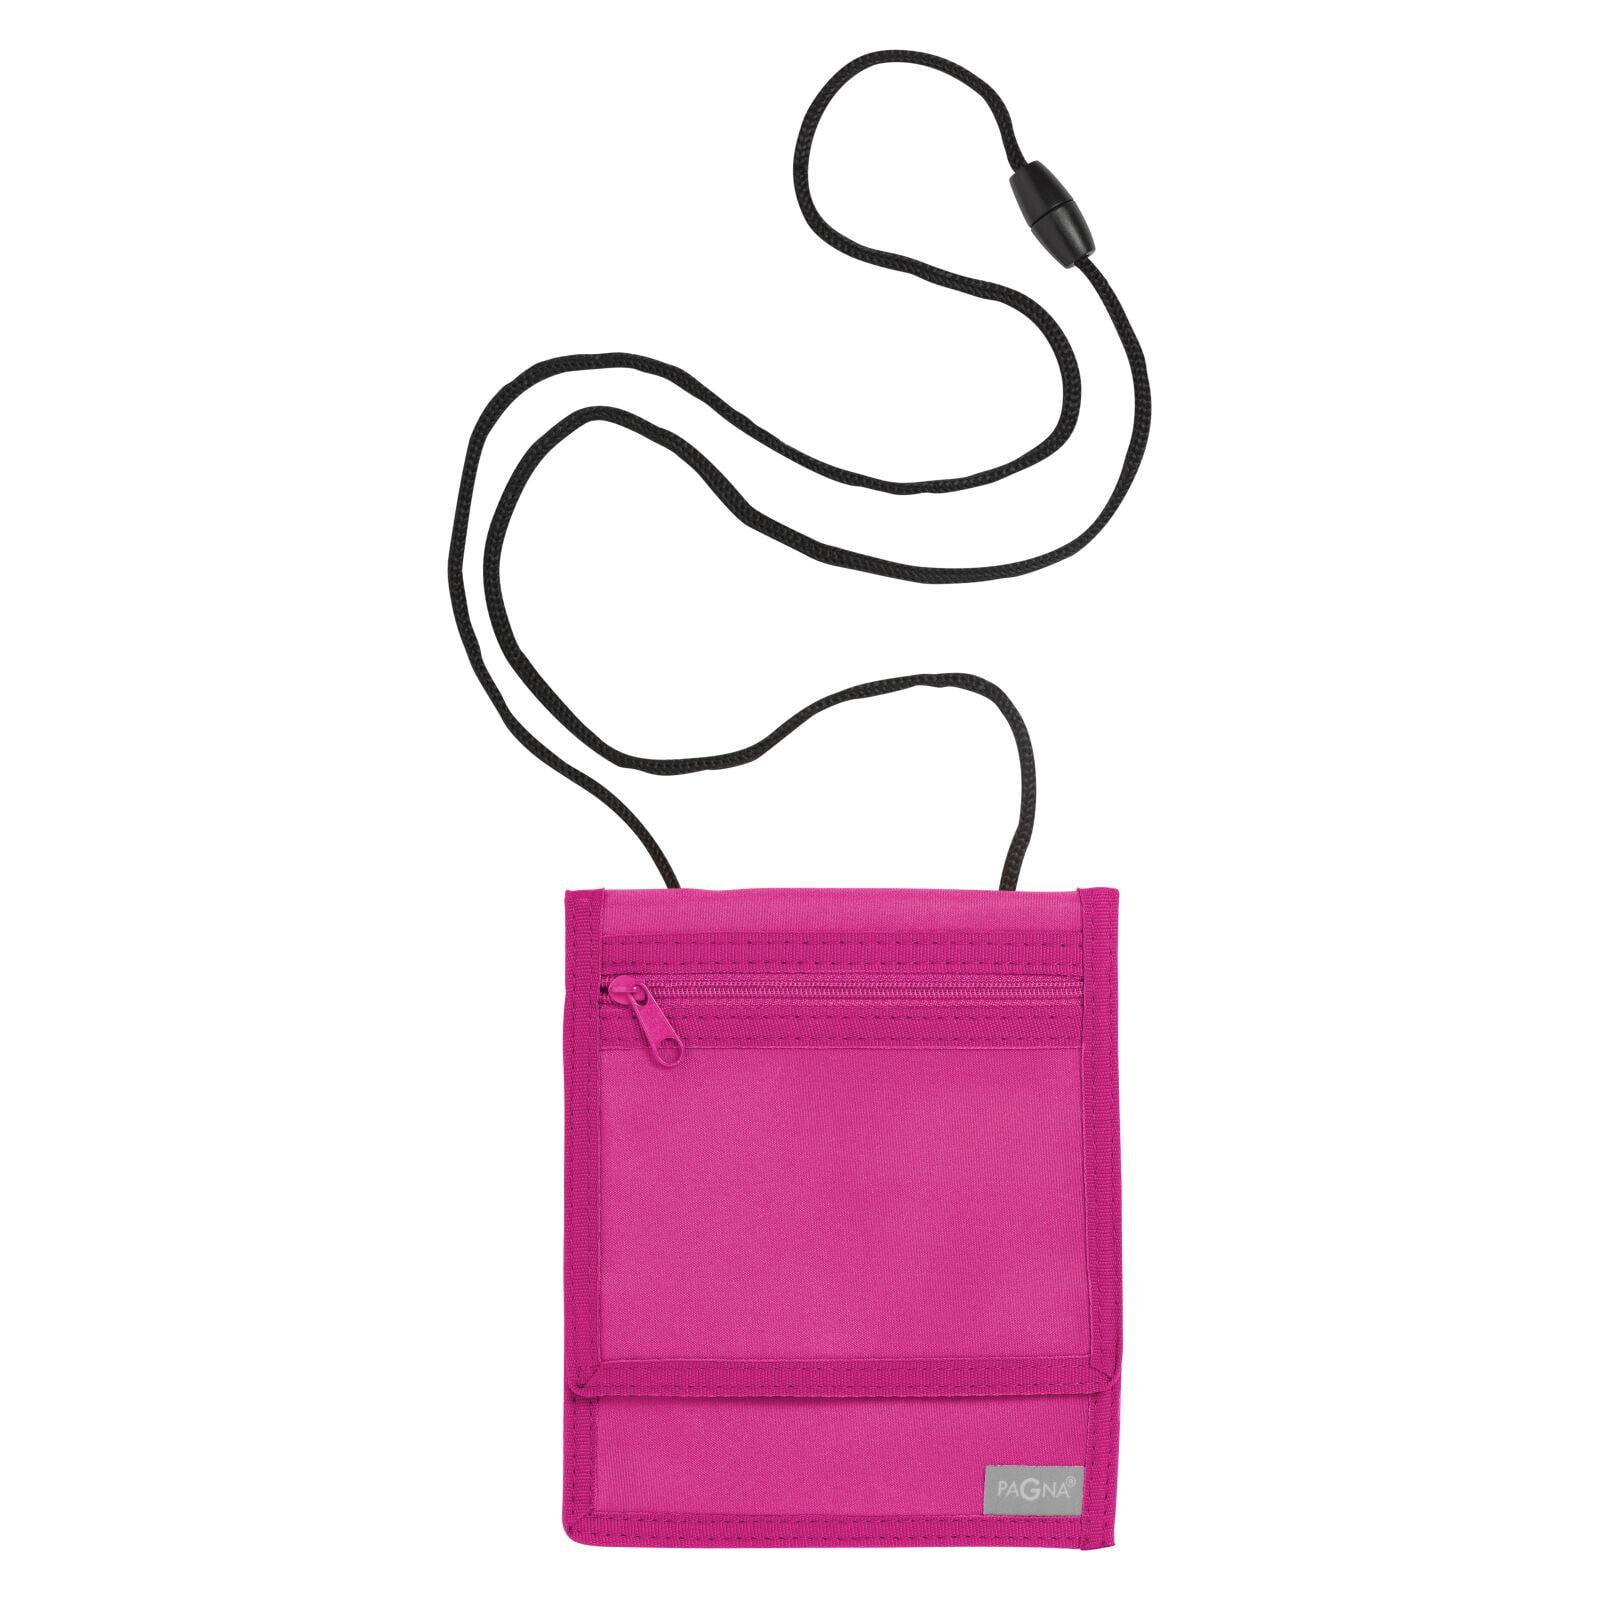 Pagna 99508-34 - Neck pouch - Pink - Nylon - Monochromatic - Neck strap - Hook-and-loop closure